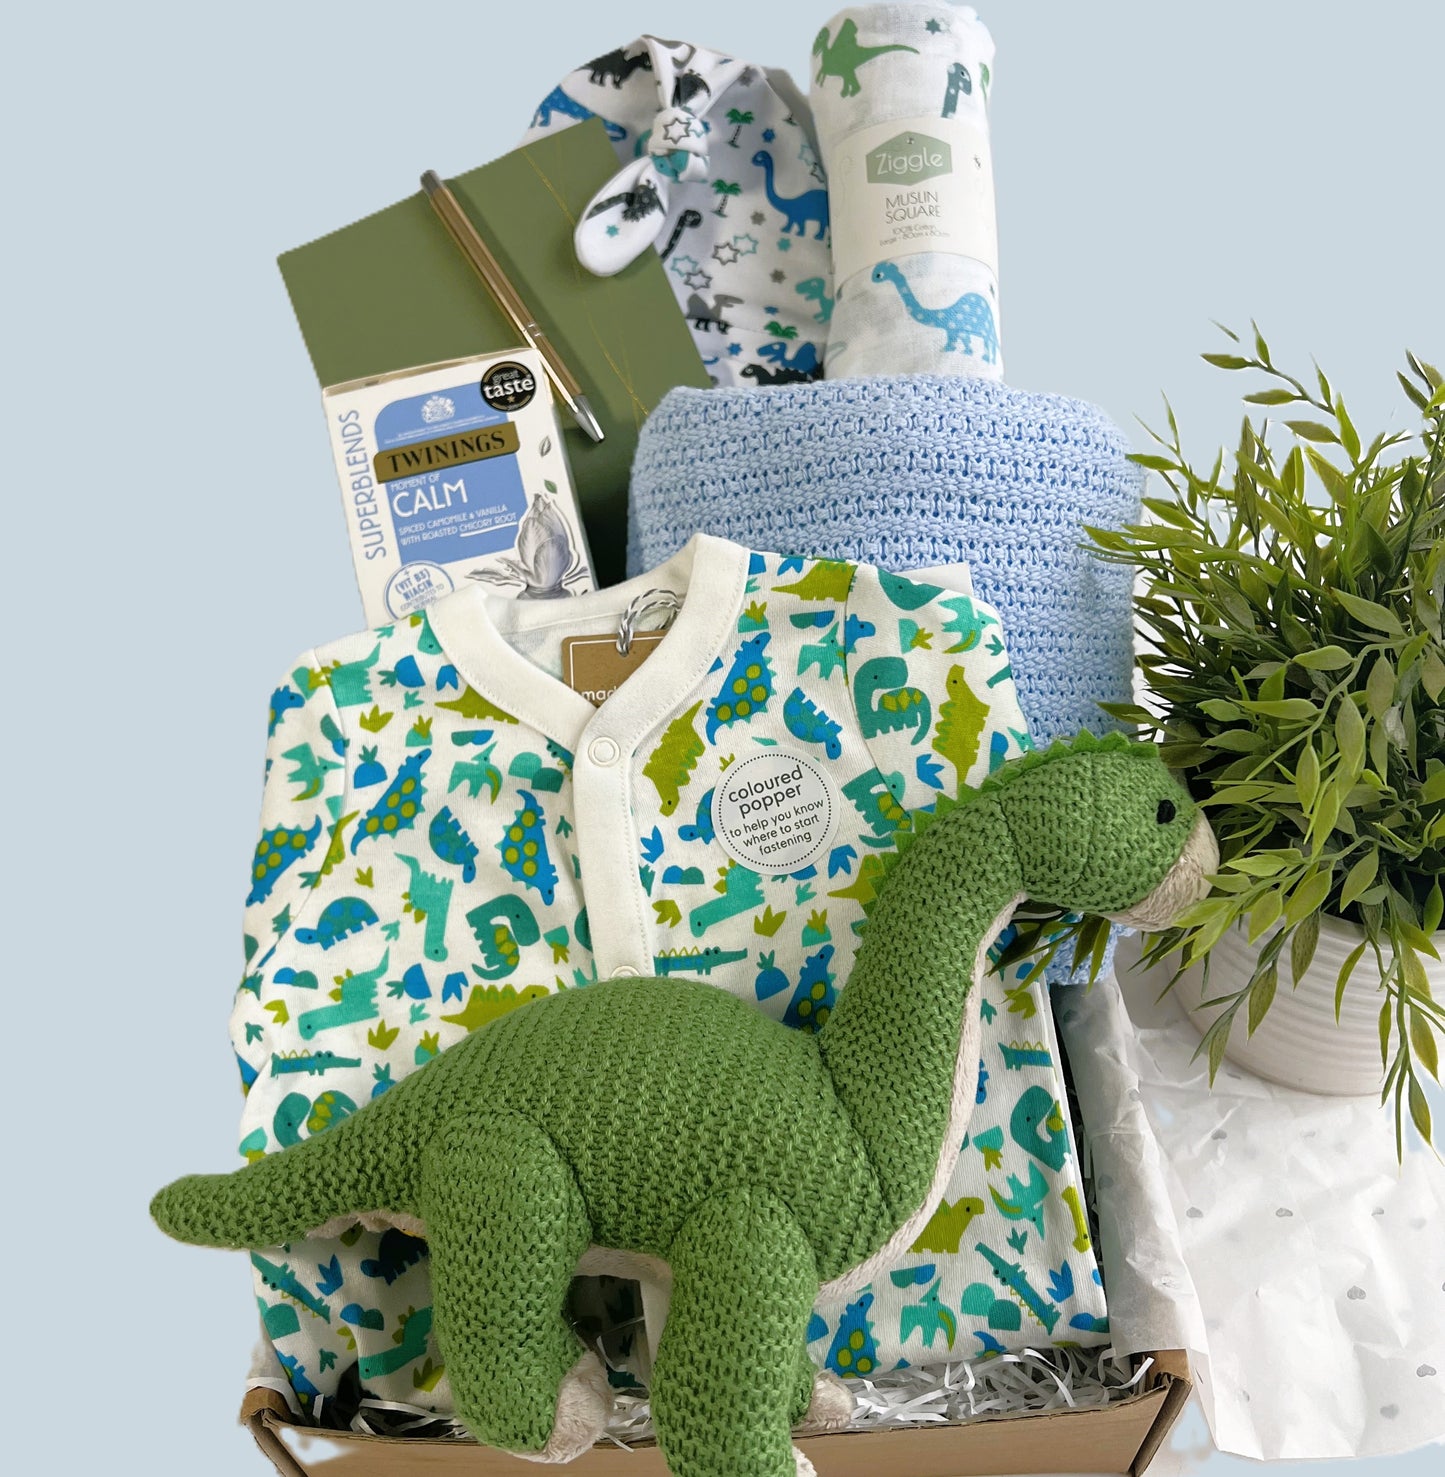 newborn baby boy hamper gift, dinosuar themed with a green Wilberry medium brontosaurs baby toy, dinosaur print baby sleepsuit, blue soft cotton cellular baby blanket, calming tea for the new parents, a baby journal and baby knot hat and muslin square.